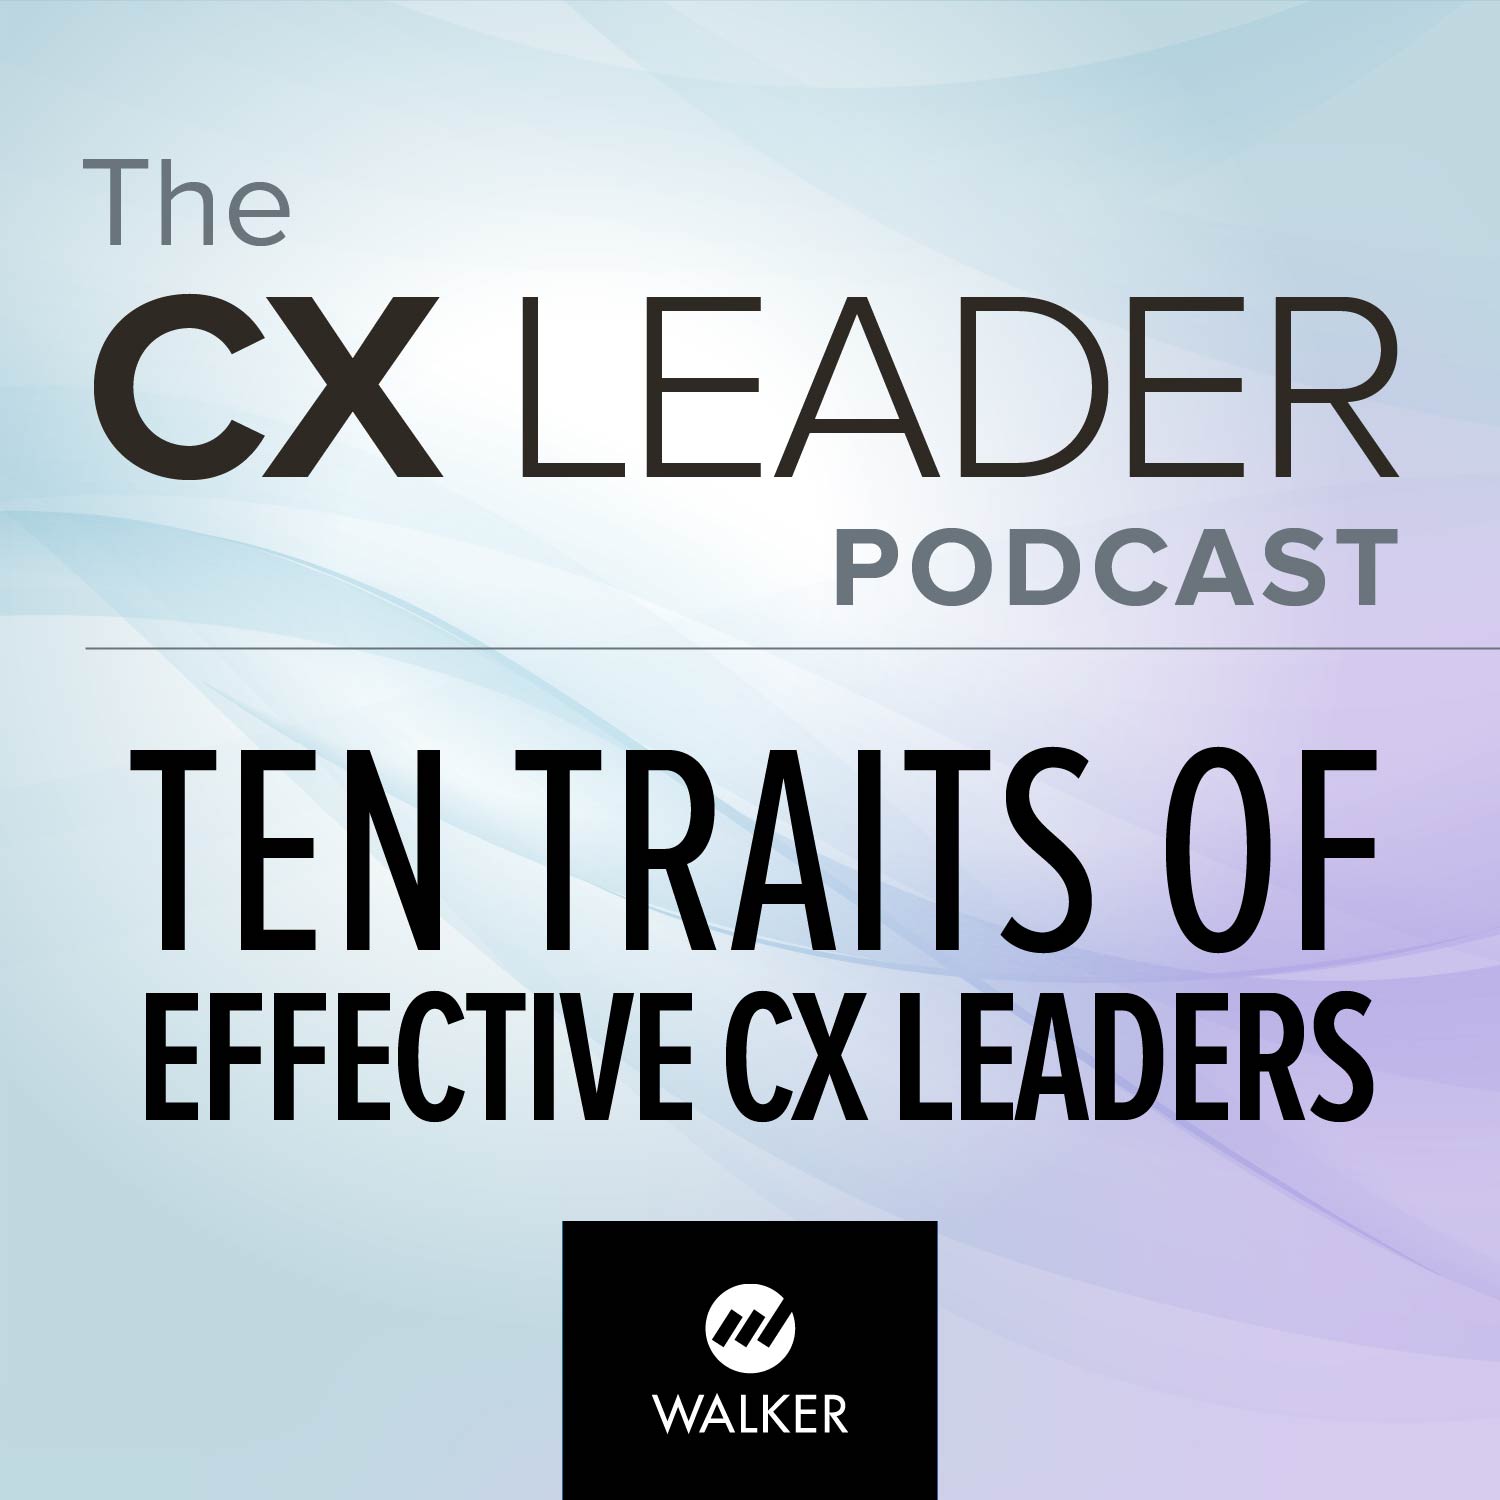 Being a Catalyst for CX Change